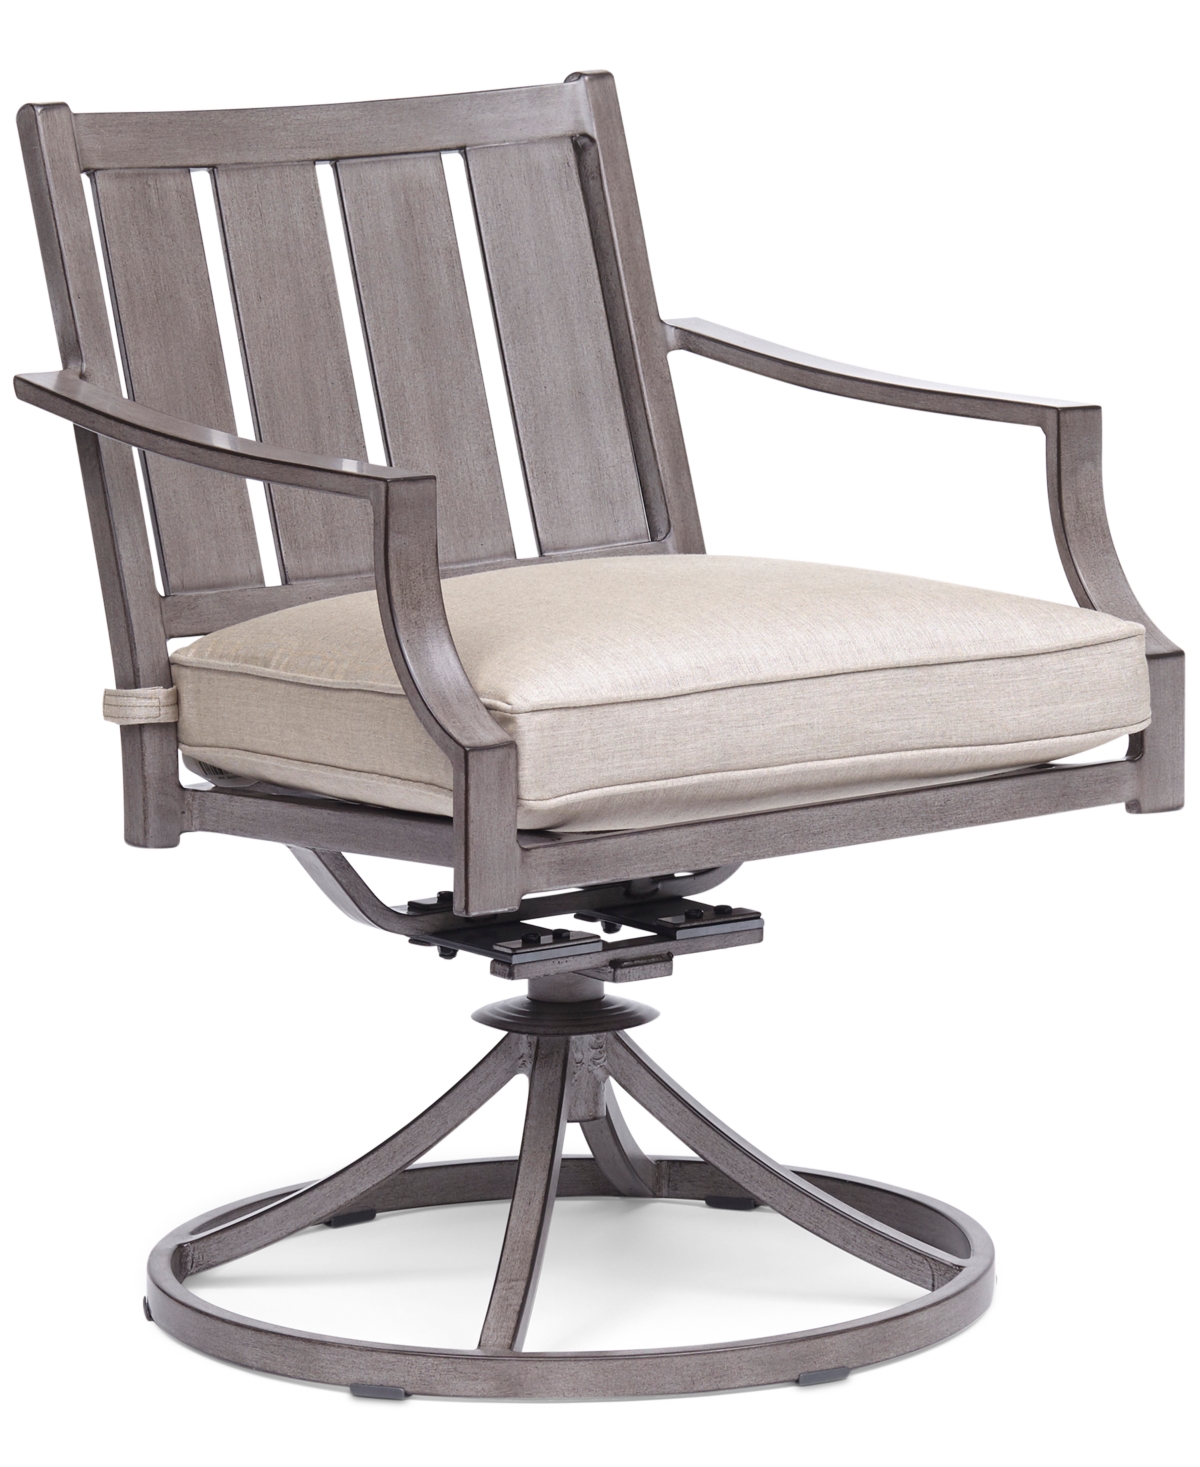 AGIO CLOSEOUT! WAYLAND OUTDOOR SWIVEL CHAIR WITH SUNBRELLA CUSHIONS, CREATED FOR MACY'S